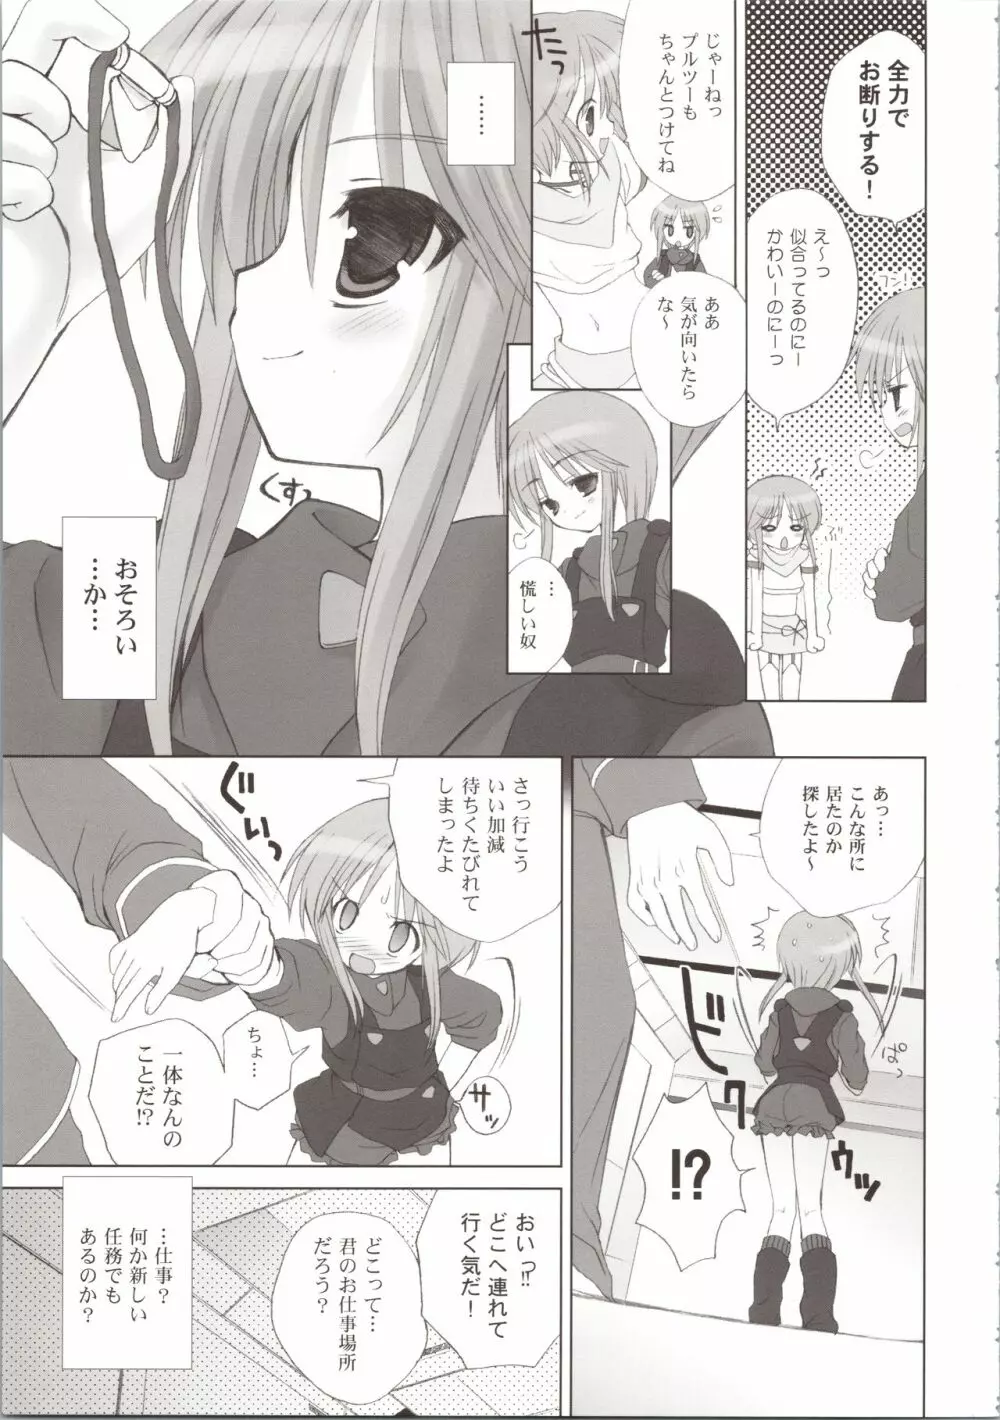 ELPEO-PLE GENERATION EVENT LIMITED EDITION - page53